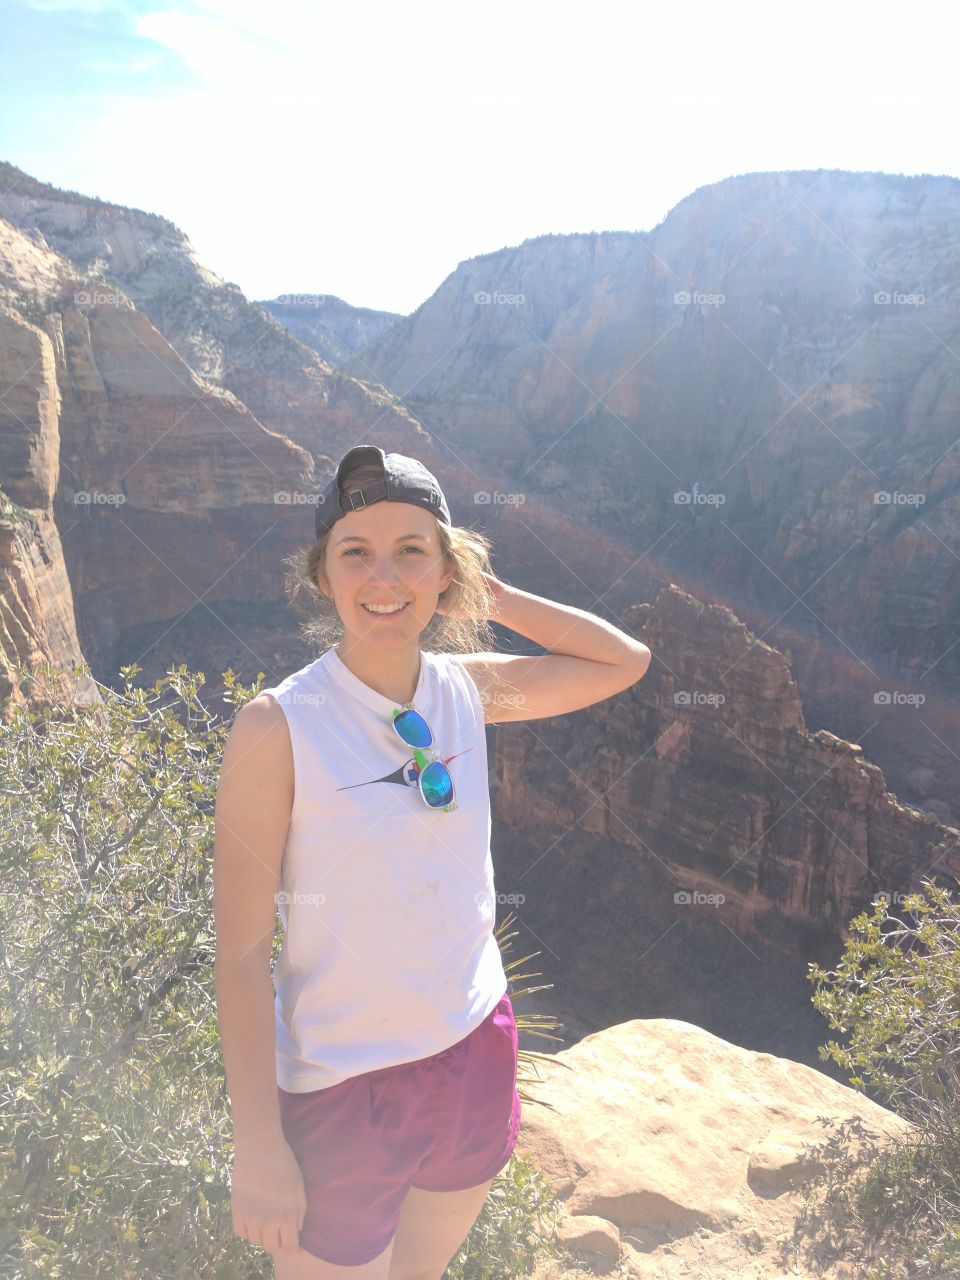 Girl at the summit of angel's landing.